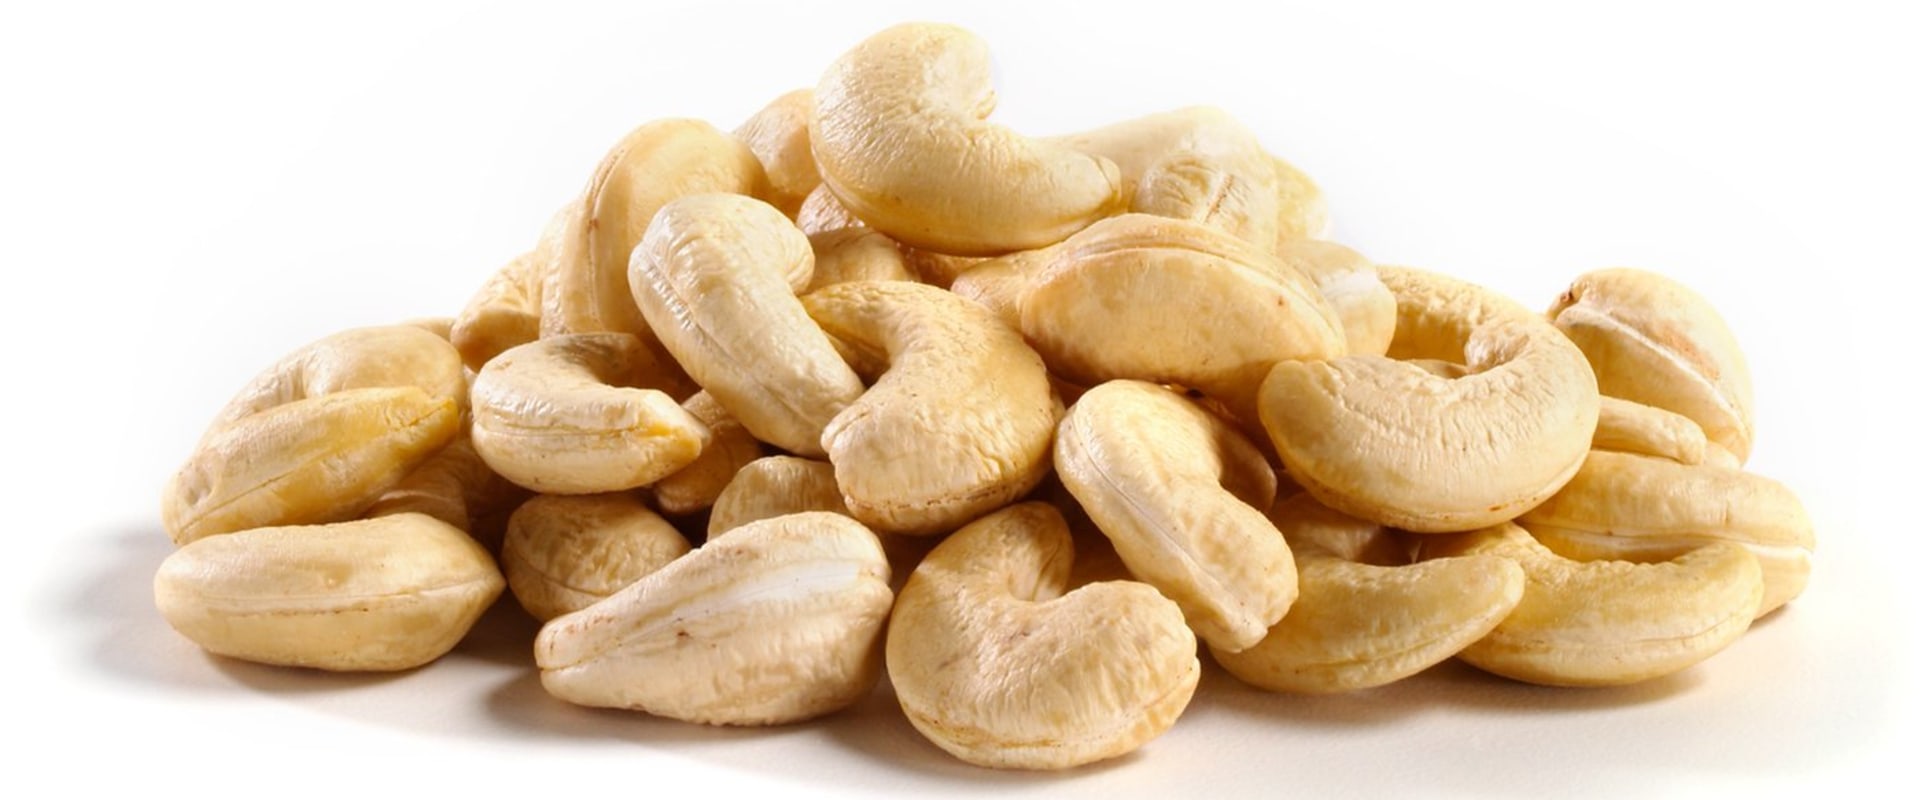 How much do cashews cost?